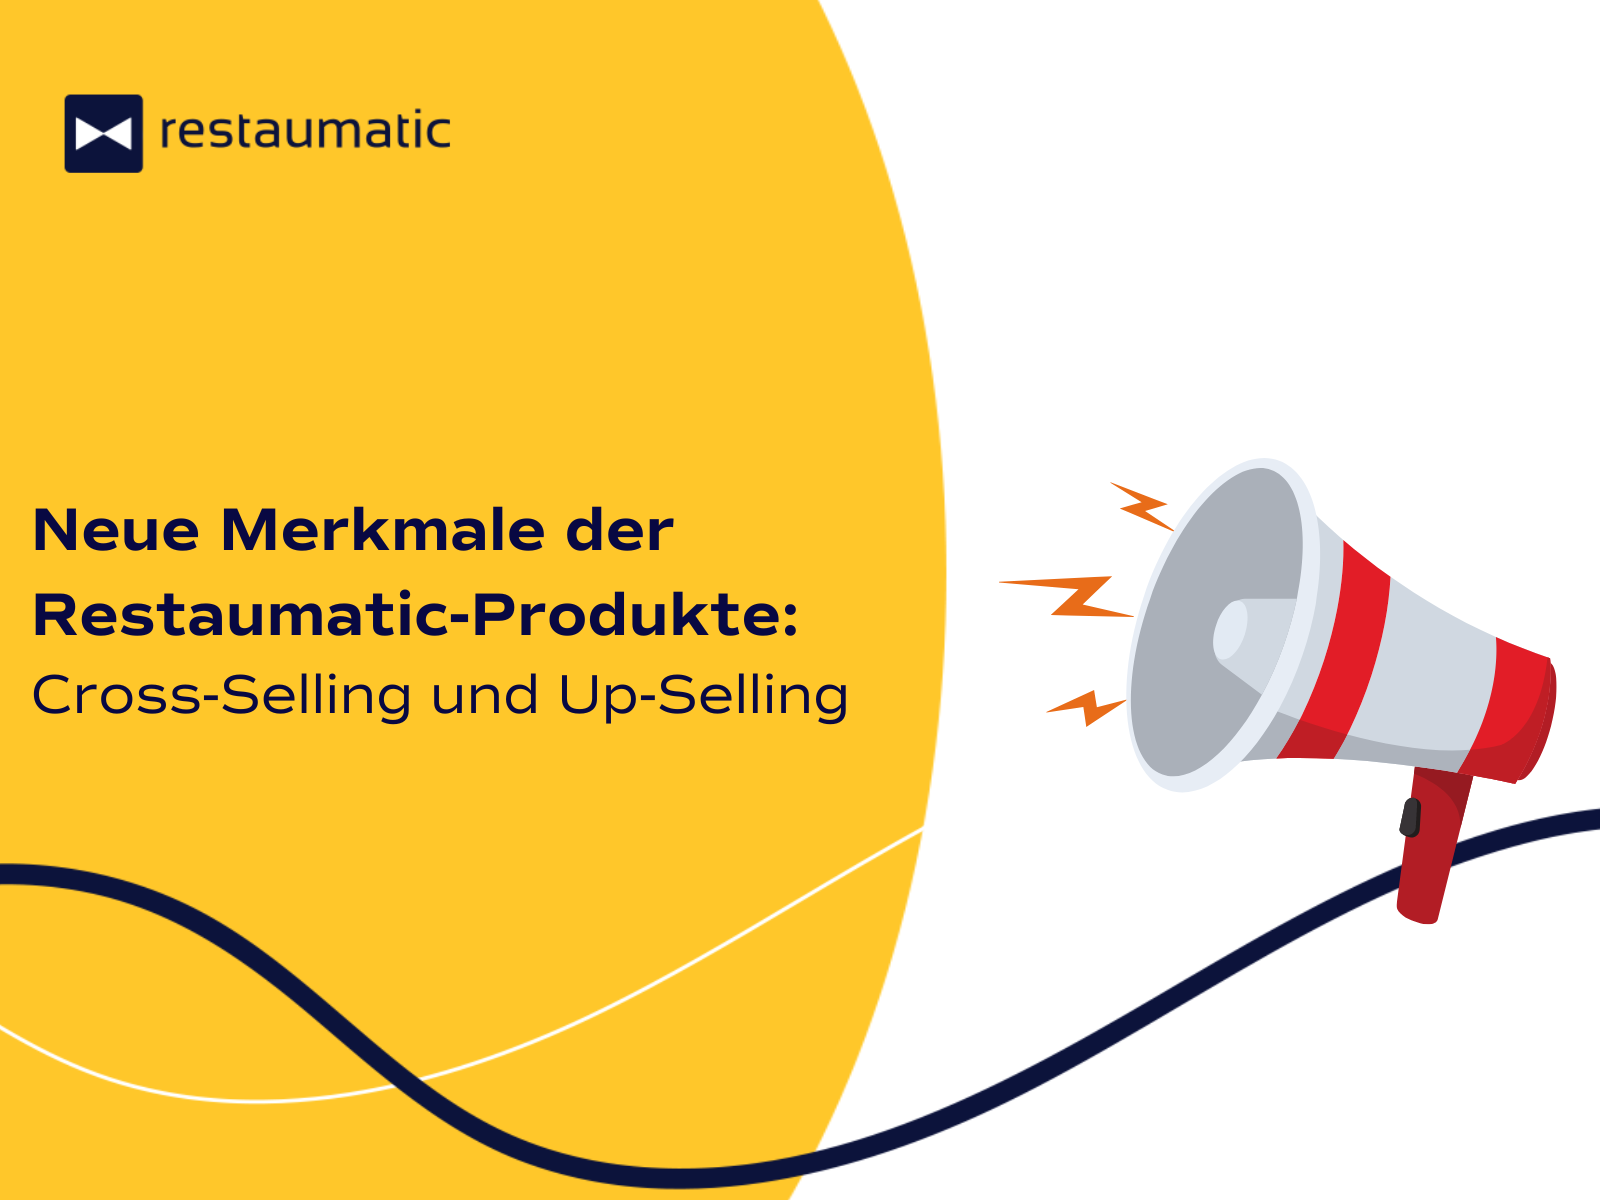 cross-selling und up-selling